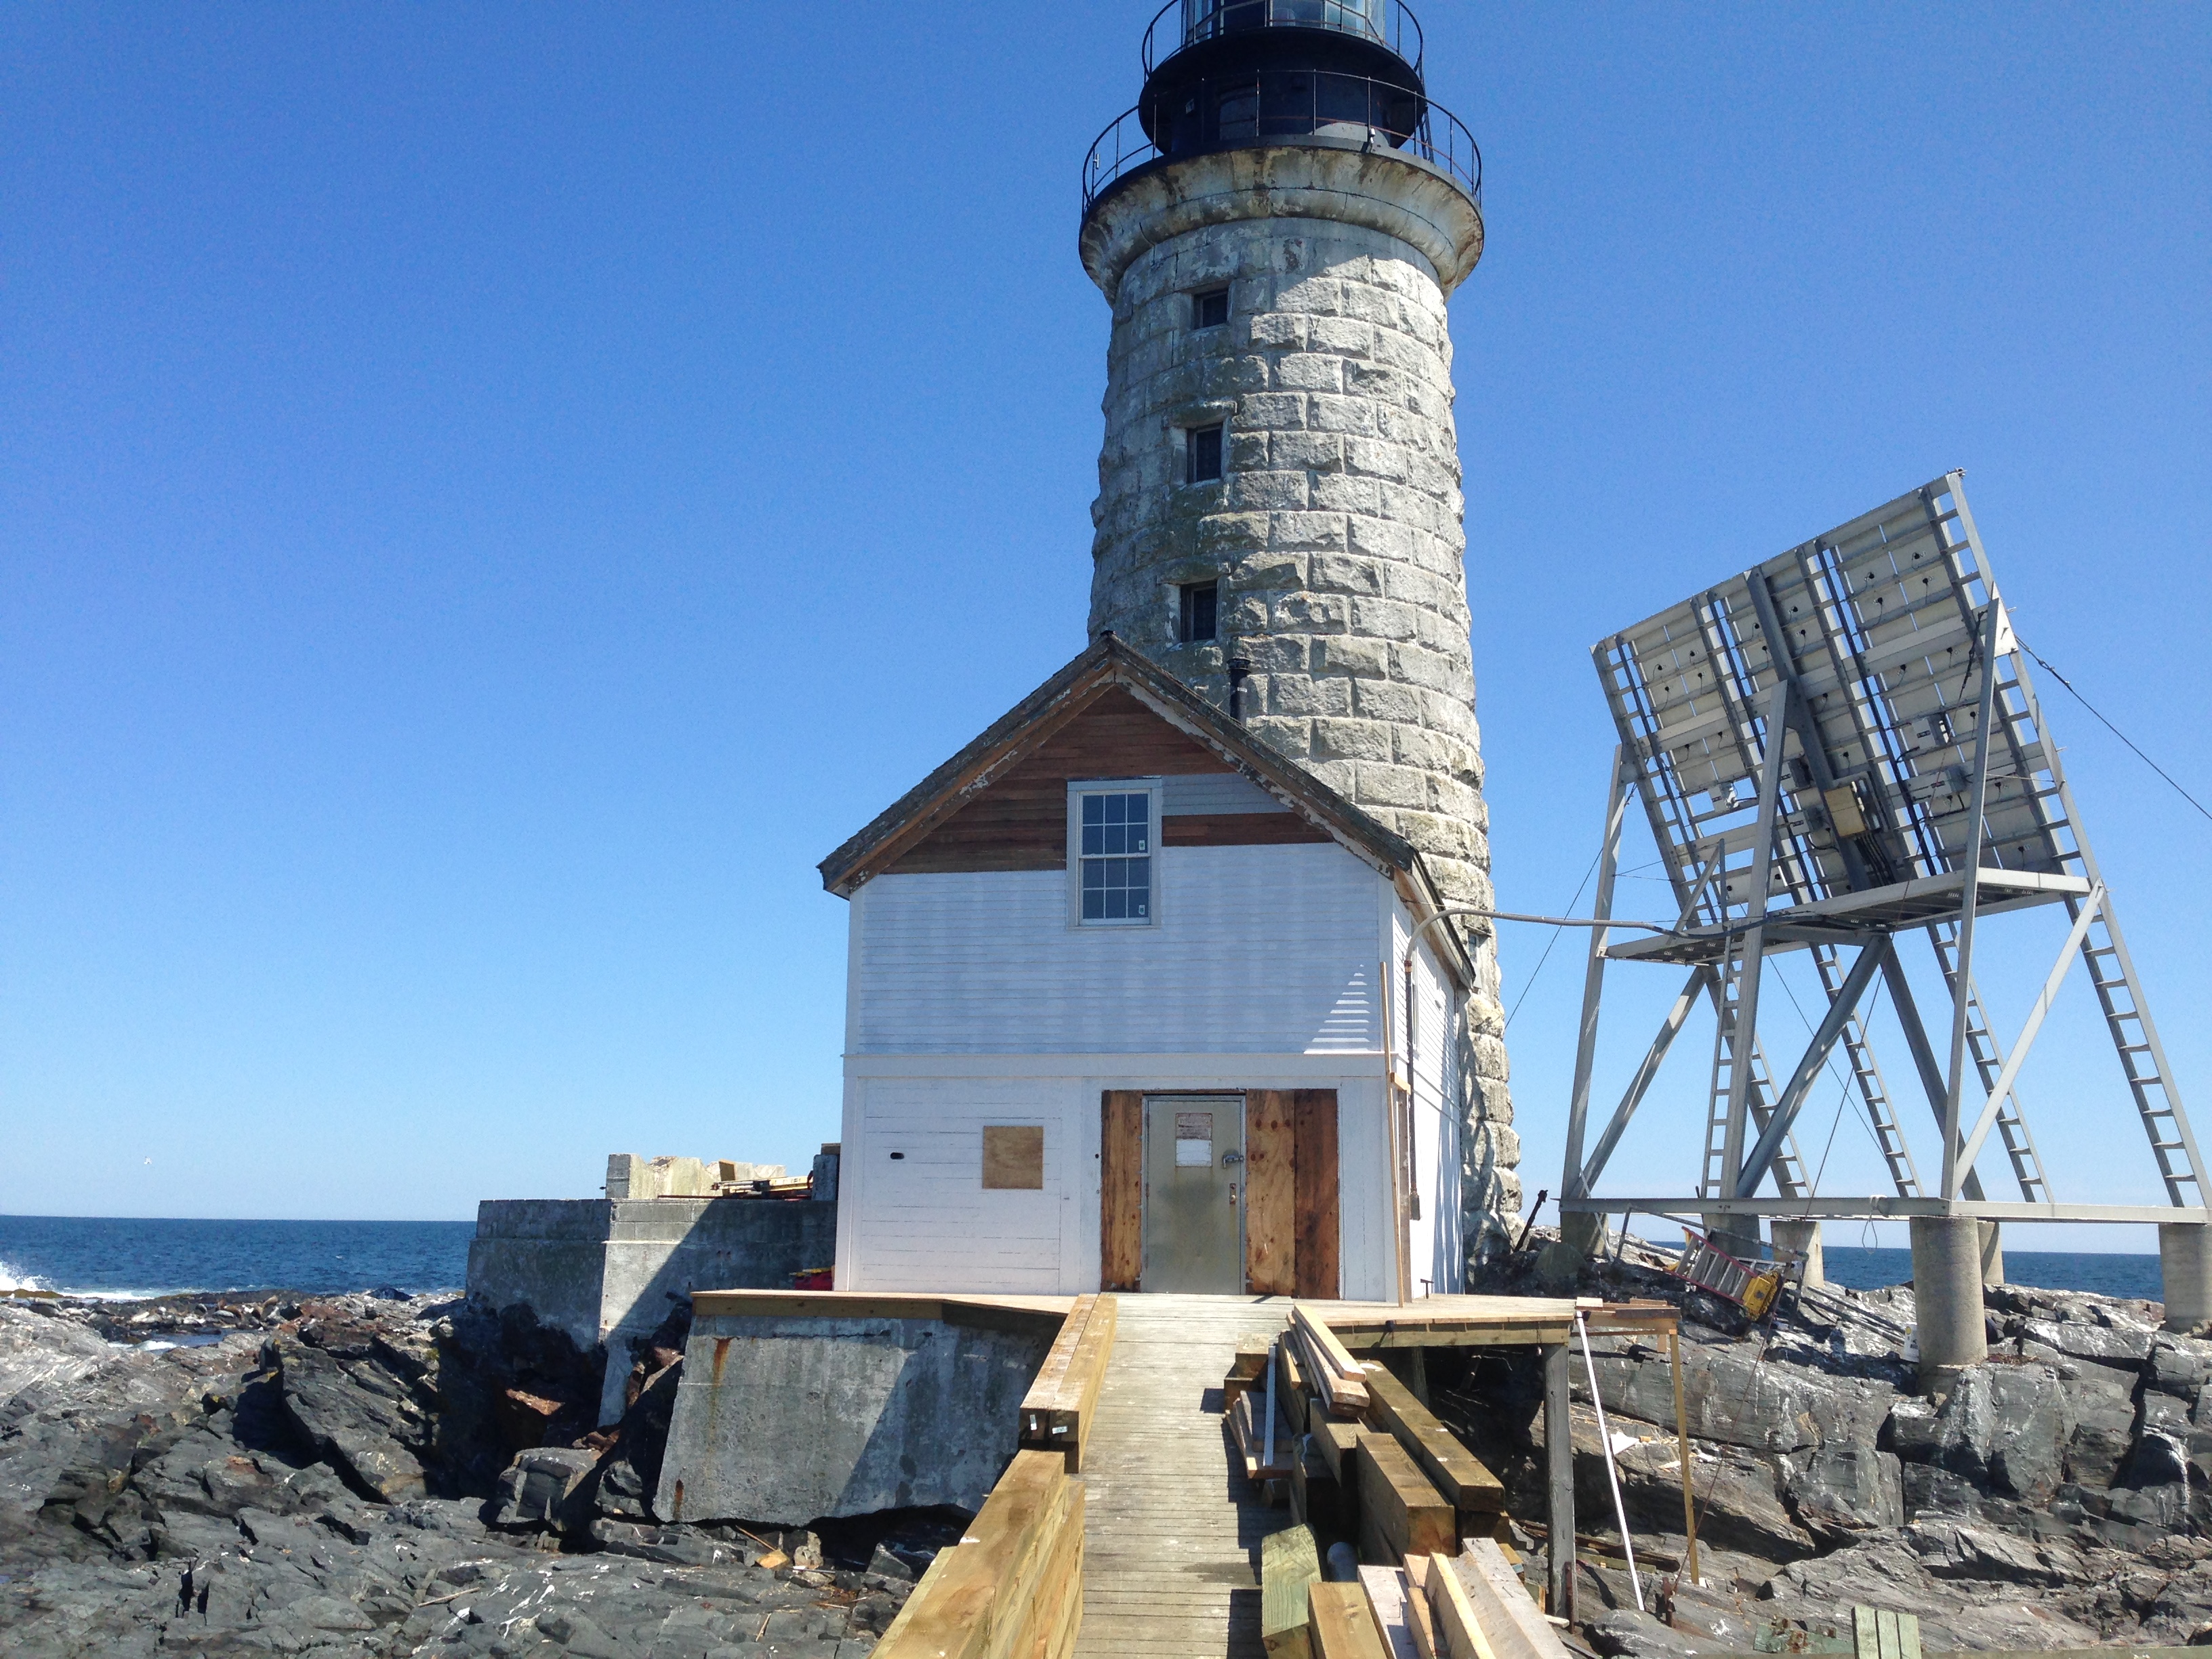 Gallery of Our Work | Watercove Painting & Restoration